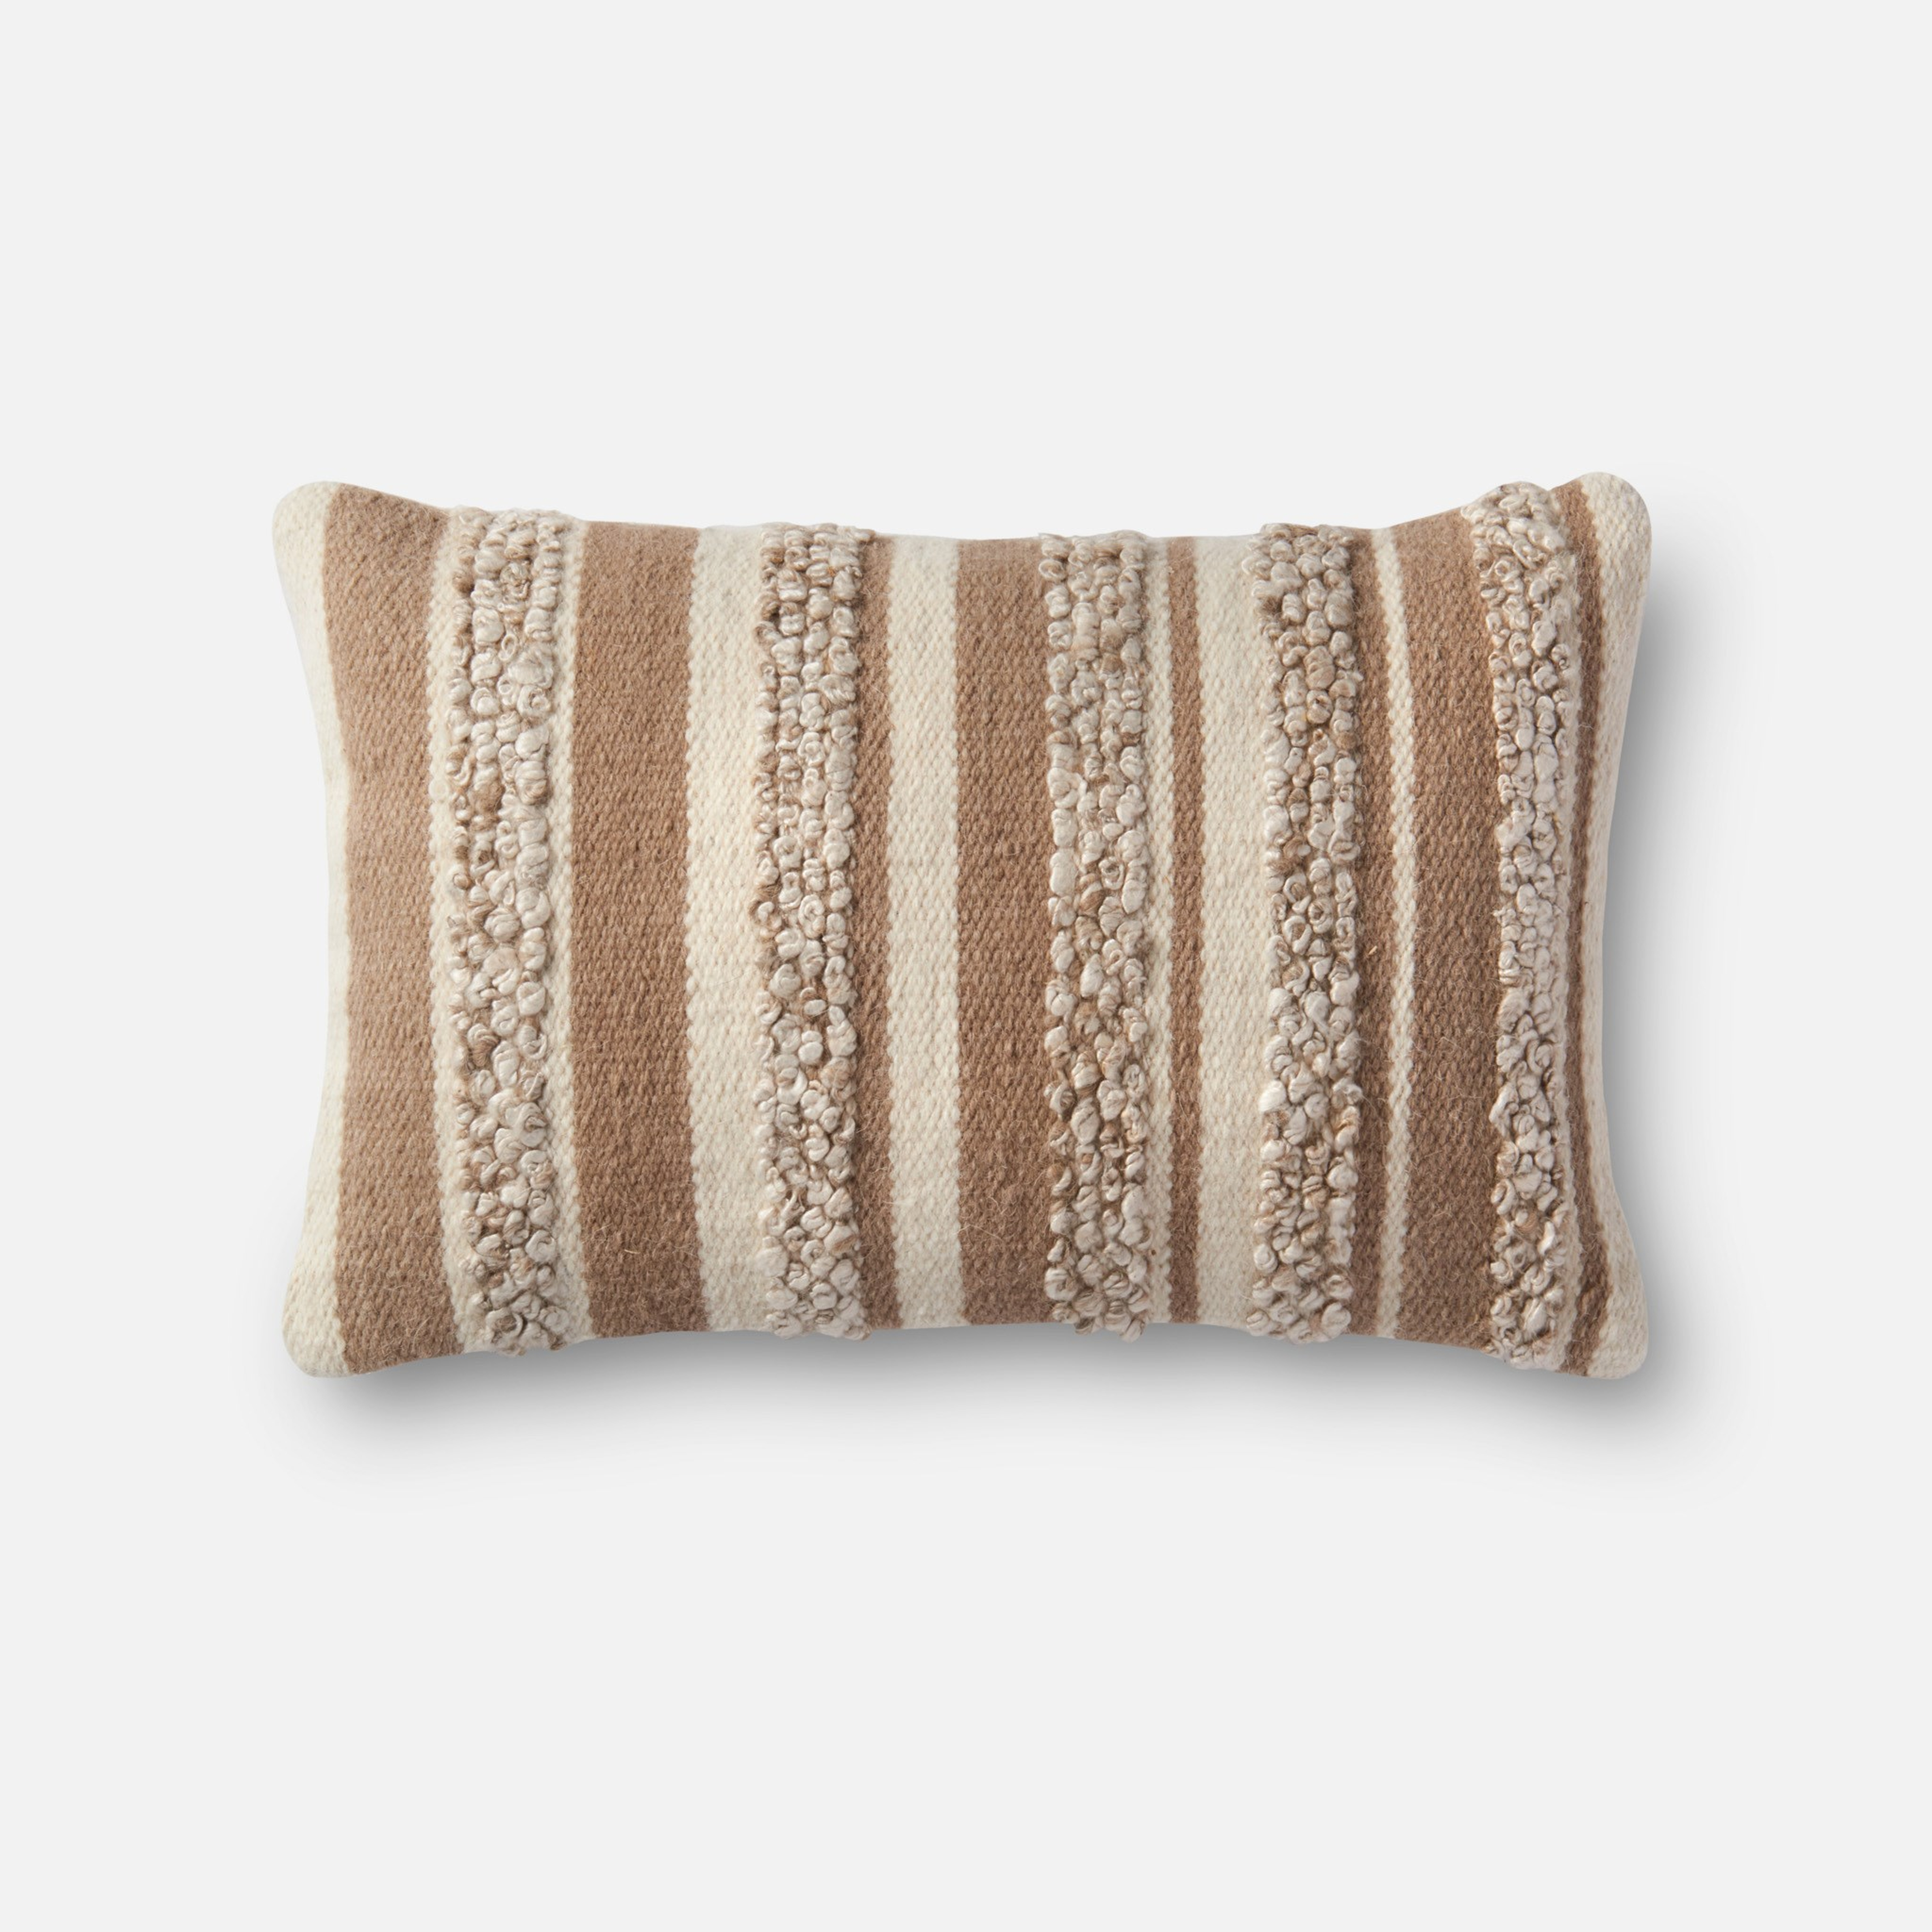 PILLOWS - BEIGE / IVORY - Loloi Rugs